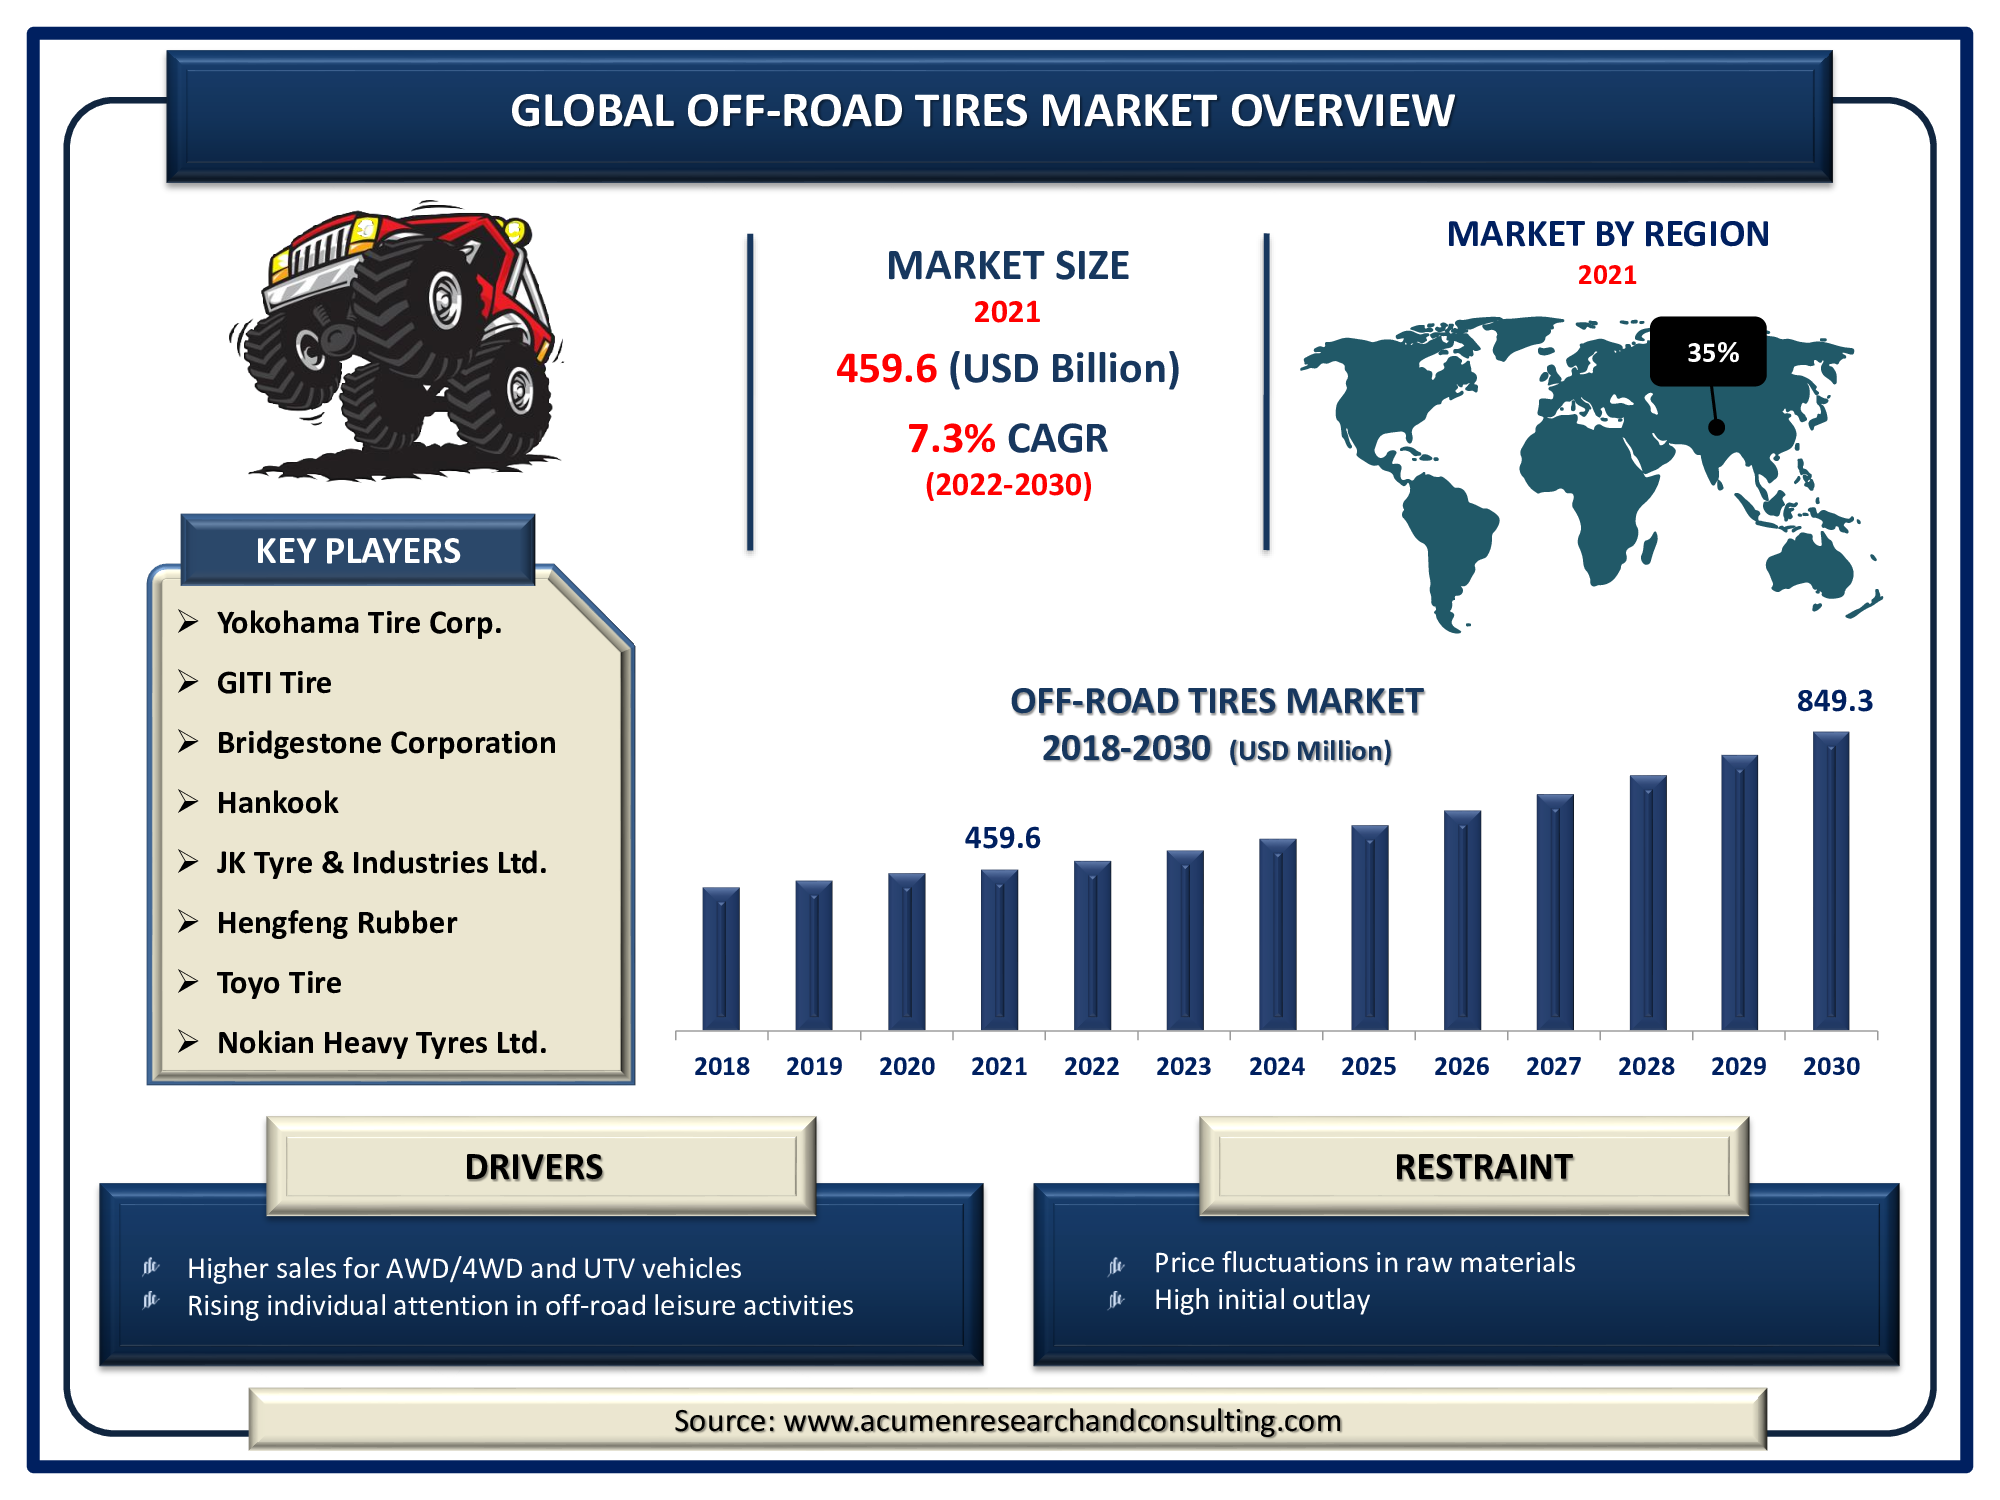 Off-road Tires Market is expected to reach the value of USD 849.3 Billion by 2030, growing at a CAGR of 7.3%